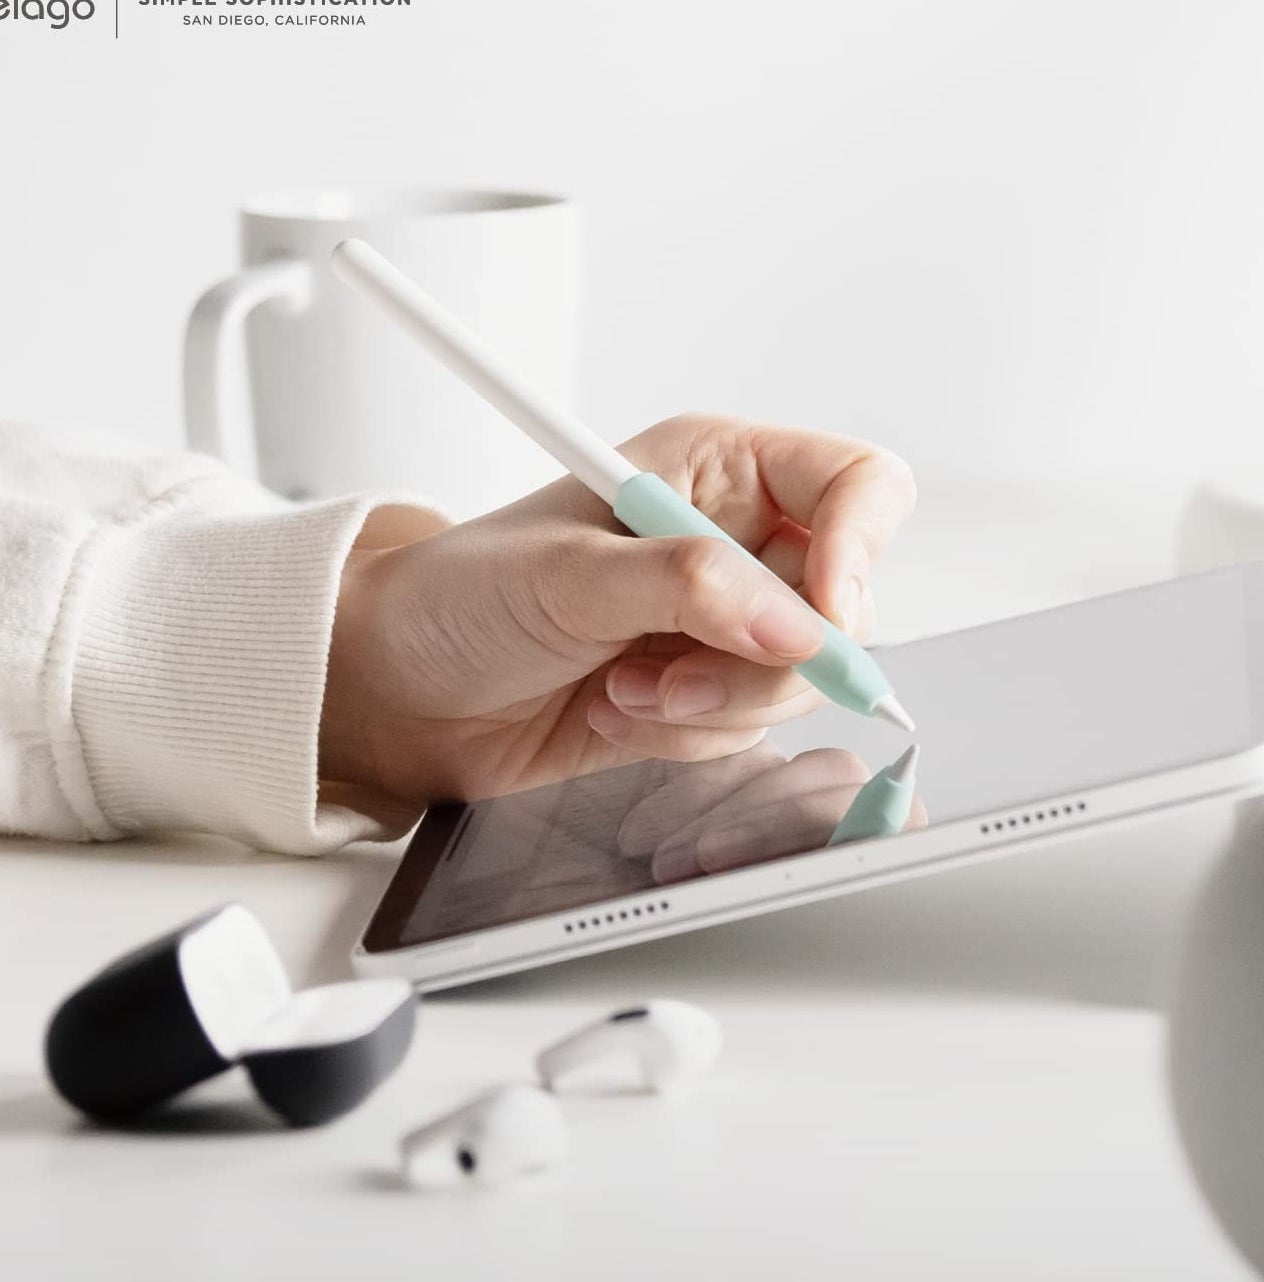 A person using their Apple Pencil with a grip on it